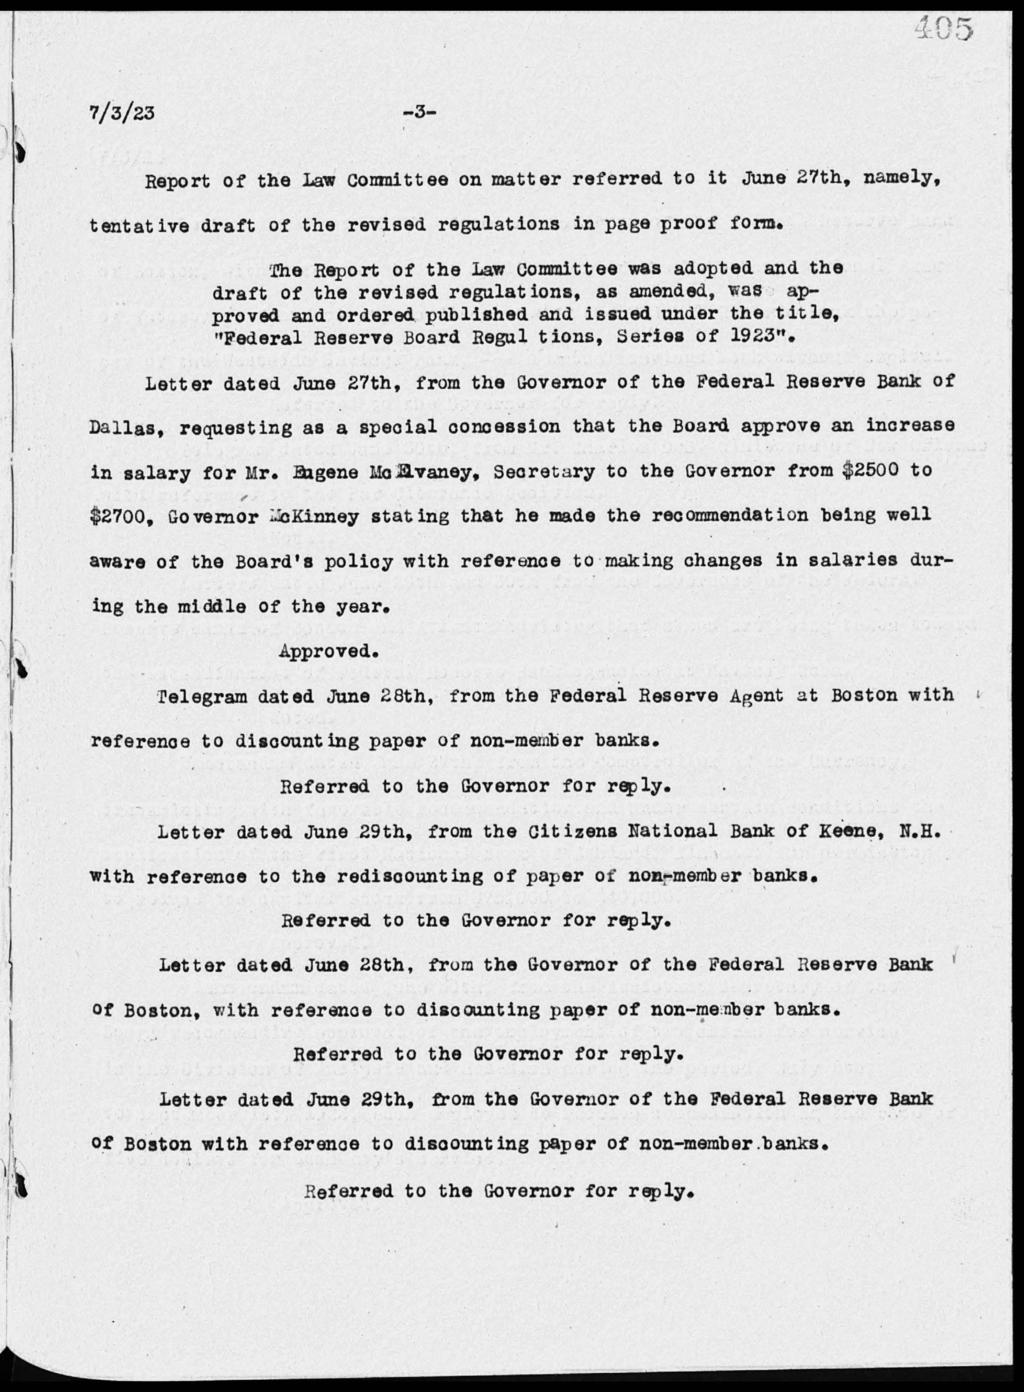 7/3/23-3- Report of the law Committee on matter referred to it June 27th, namely, tentative draft of the revised regulations in page proof form.